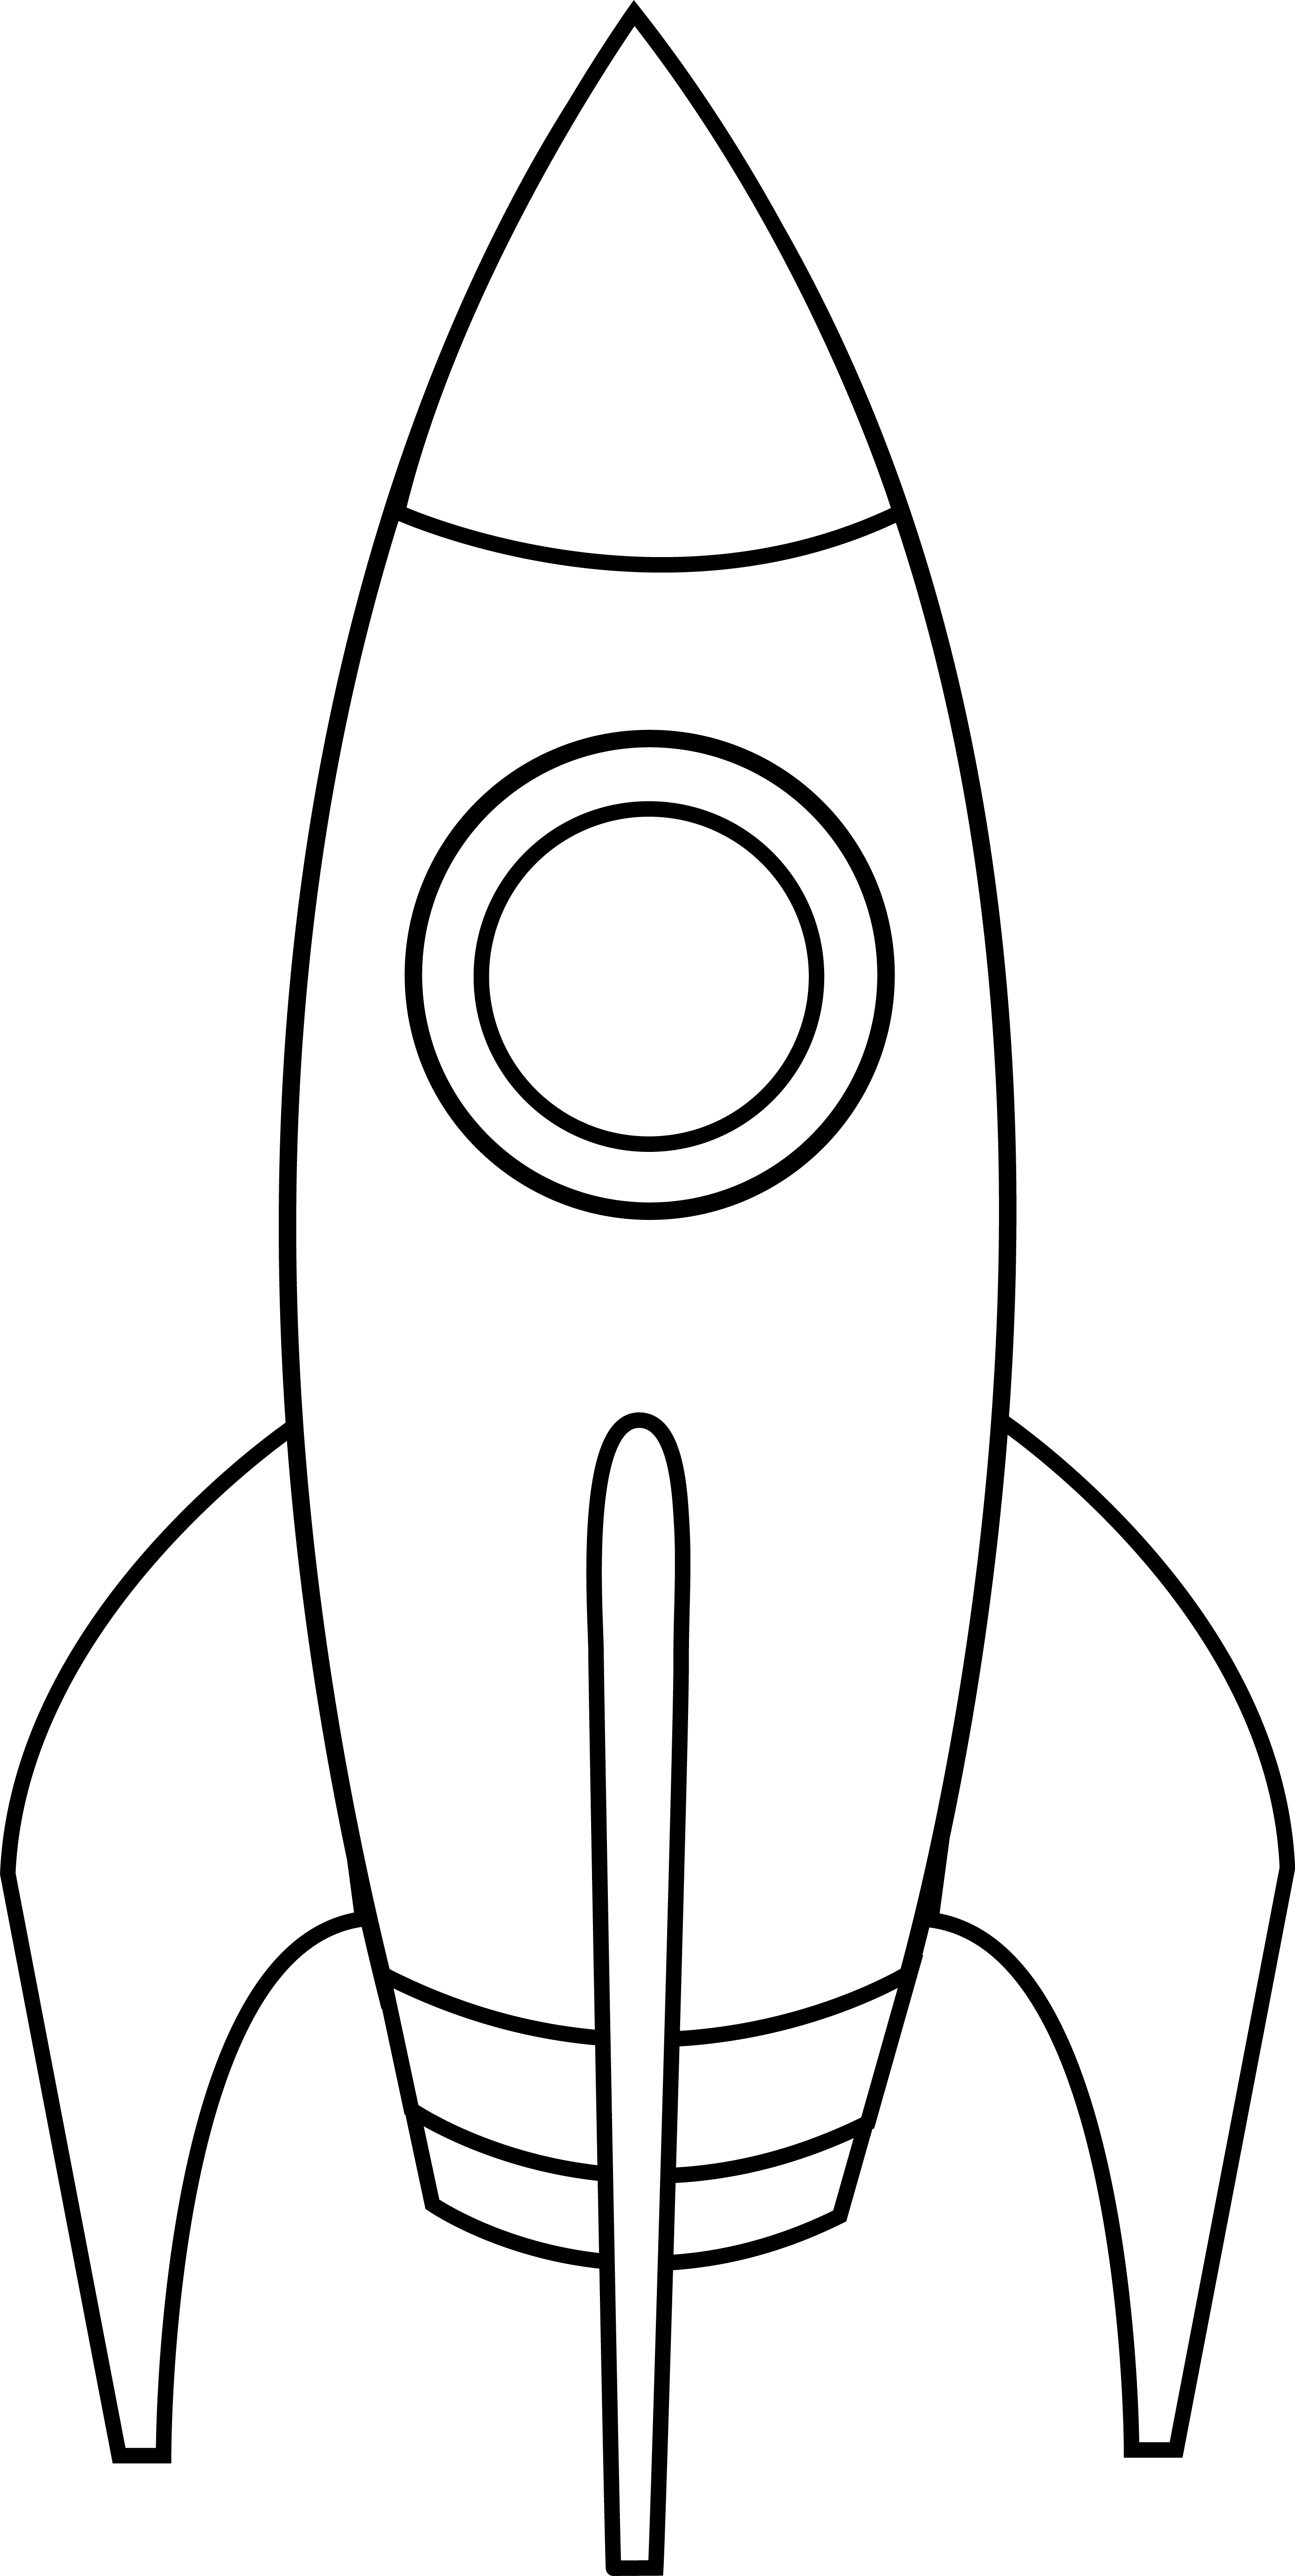 Images For > Space Ship Clip Art